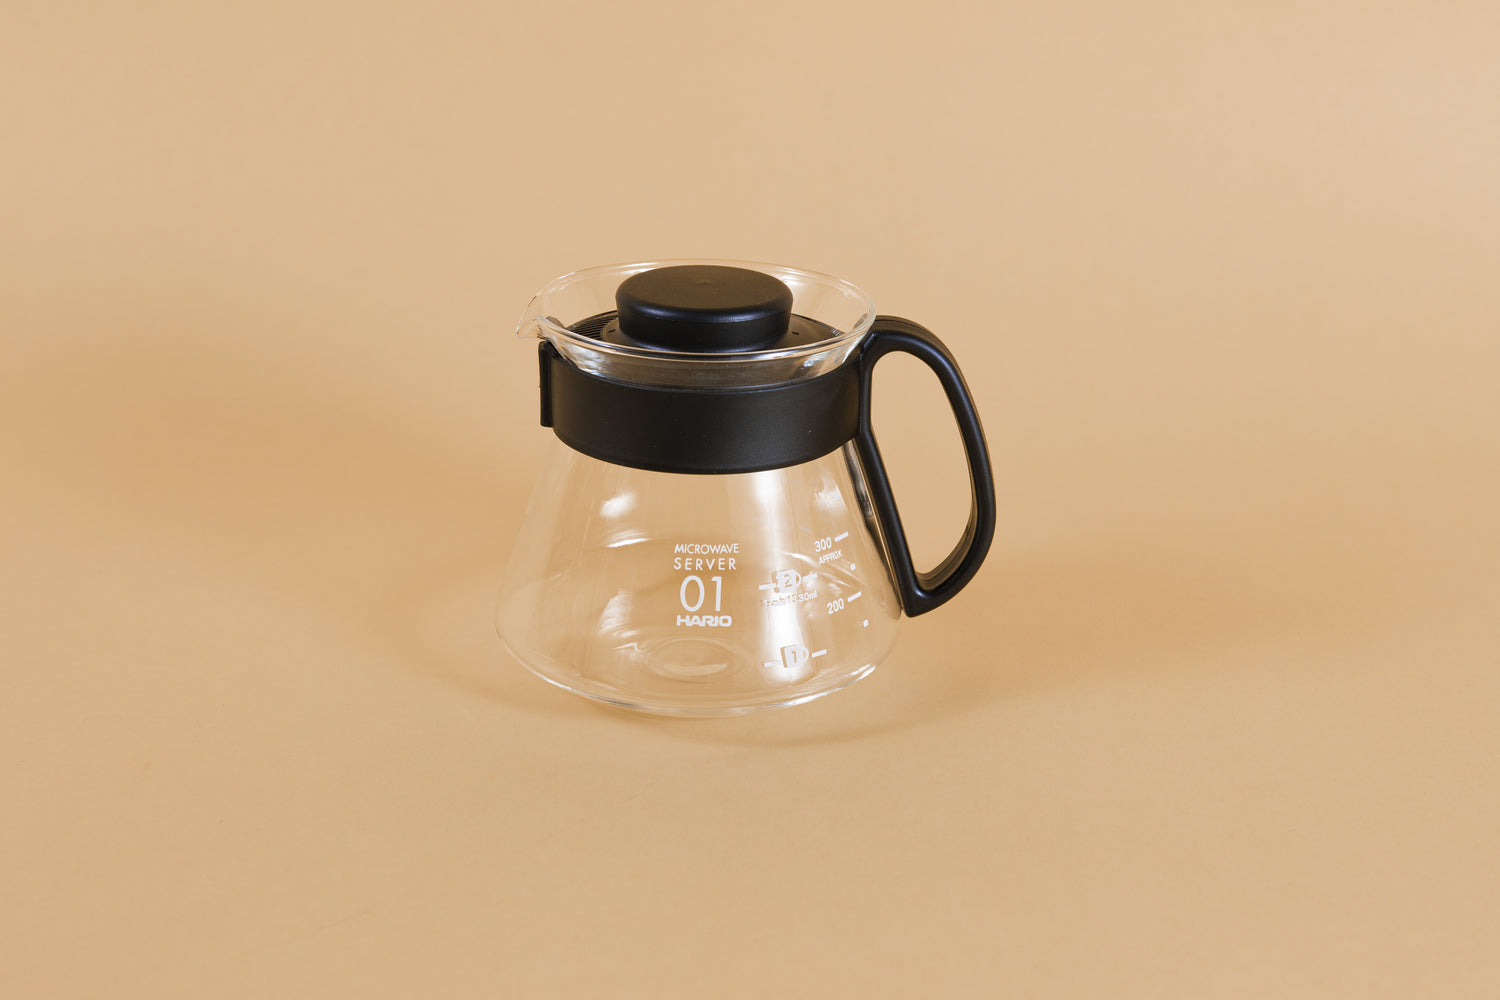 Glass coffee server with white text and level markings with closed black plastic handle and lid on an orange backdrop.